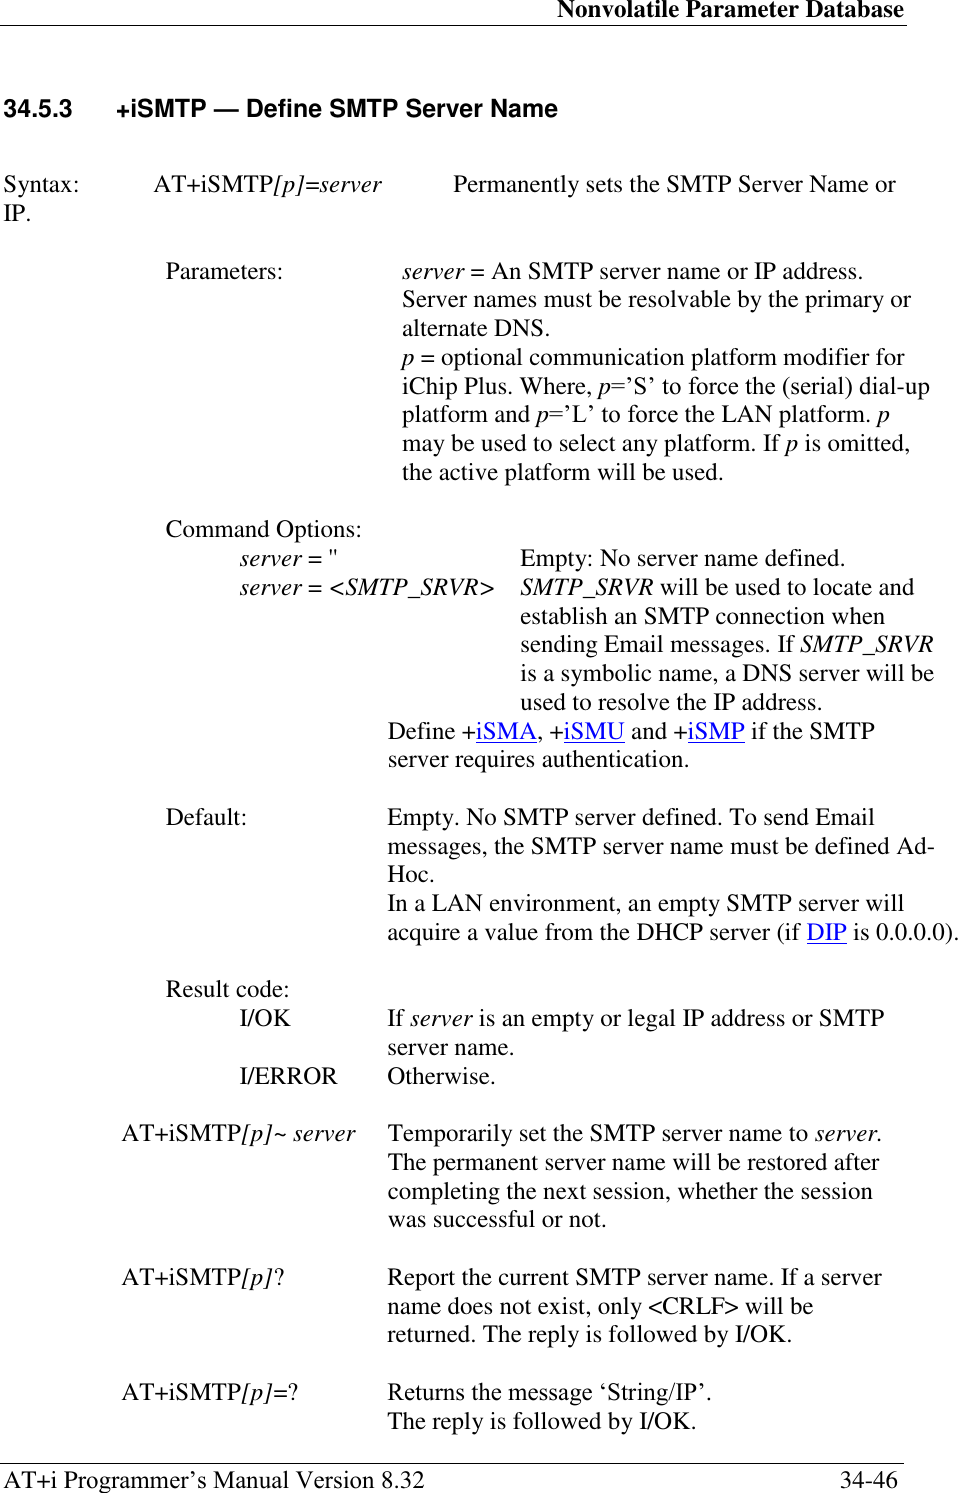 Nonvolatile Parameter Database AT+i Programmer‘s Manual Version 8.32  34-46 34.5.3  +iSMTP — Define SMTP Server Name   Syntax:  AT+iSMTP[p]=server  Permanently sets the SMTP Server Name or IP.  Parameters:  server = An SMTP server name or IP address. Server names must be resolvable by the primary or alternate DNS.  p = optional communication platform modifier for iChip Plus. Where, p=‘S‘ to force the (serial) dial-up platform and p=‘L‘ to force the LAN platform. p may be used to select any platform. If p is omitted, the active platform will be used.  Command Options: server = &apos;&apos;  Empty: No server name defined. server = &lt;SMTP_SRVR&gt; SMTP_SRVR will be used to locate and establish an SMTP connection when sending Email messages. If SMTP_SRVR is a symbolic name, a DNS server will be used to resolve the IP address. Define +iSMA, +iSMU and +iSMP if the SMTP server requires authentication.  Default:  Empty. No SMTP server defined. To send Email messages, the SMTP server name must be defined Ad-Hoc.  In a LAN environment, an empty SMTP server will acquire a value from the DHCP server (if DIP is 0.0.0.0).  Result code: I/OK  If server is an empty or legal IP address or SMTP server name. I/ERROR   Otherwise.  AT+iSMTP[p]~ server   Temporarily set the SMTP server name to server. The permanent server name will be restored after completing the next session, whether the session was successful or not.  AT+iSMTP[p]?  Report the current SMTP server name. If a server name does not exist, only &lt;CRLF&gt; will be returned. The reply is followed by I/OK.  AT+iSMTP[p]=? Returns the message ‗String/IP‘.  The reply is followed by I/OK. 